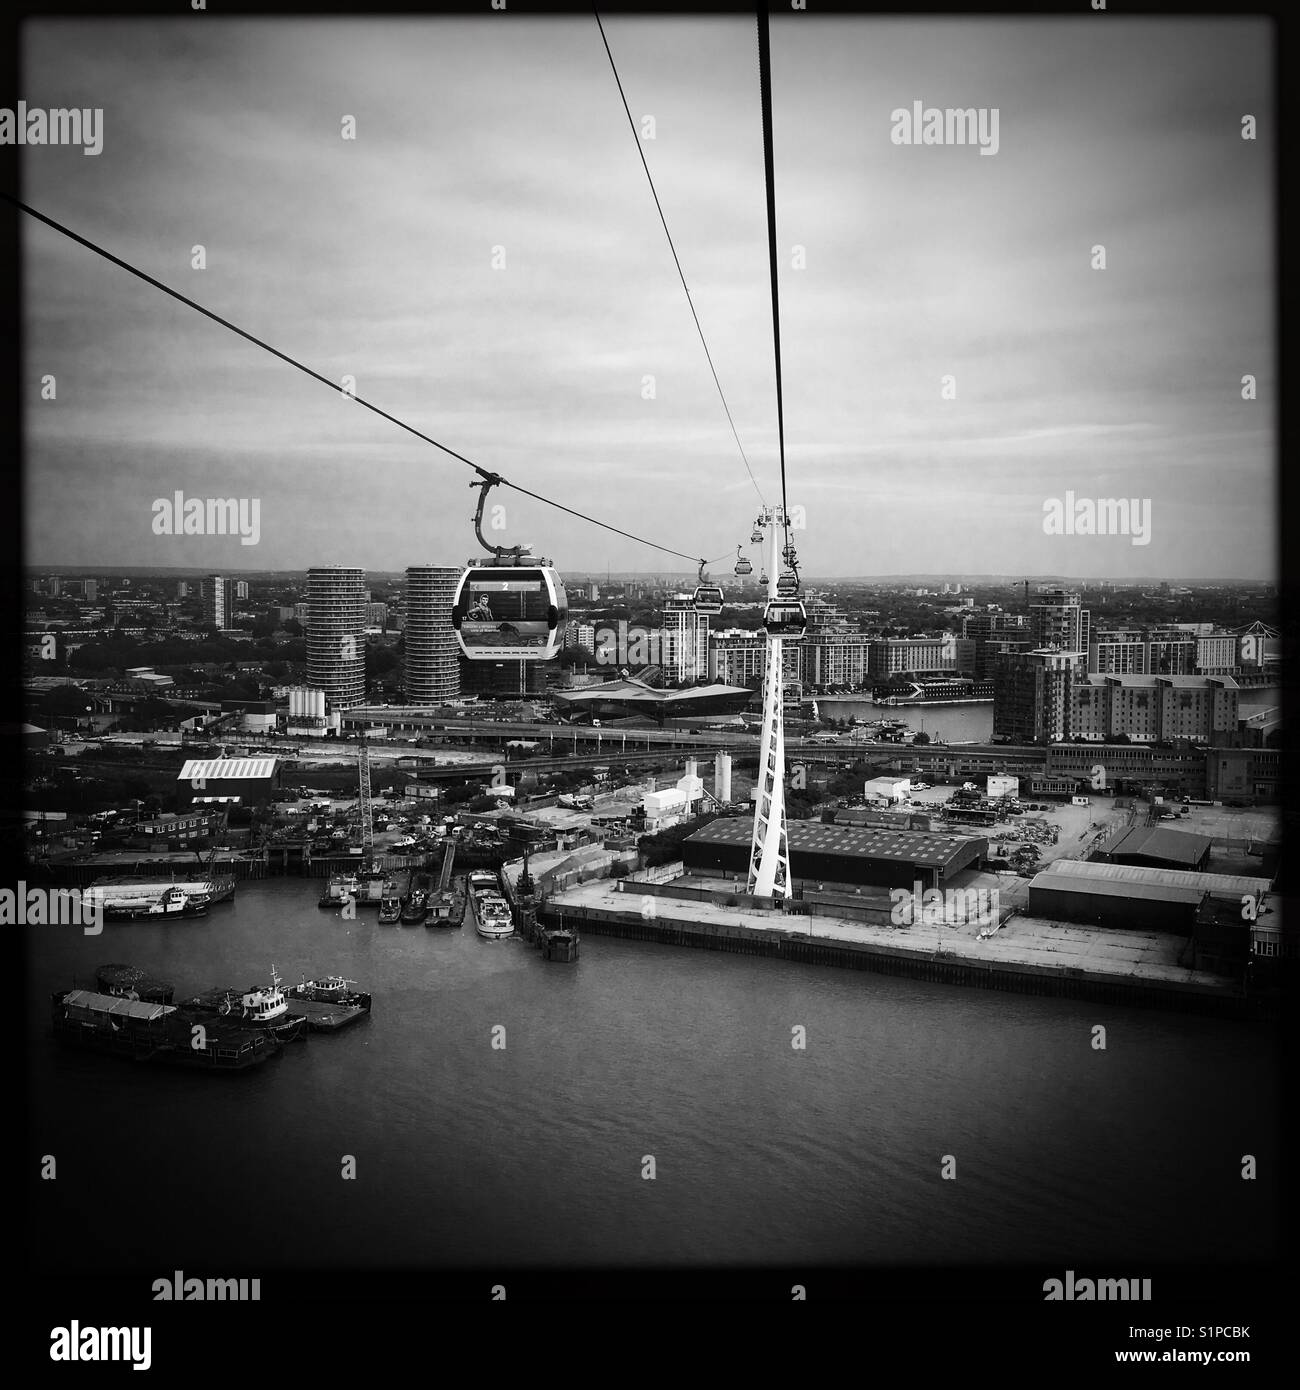 Emirates Air Line Cable Car über die Themse in London Greenwich Stockfoto